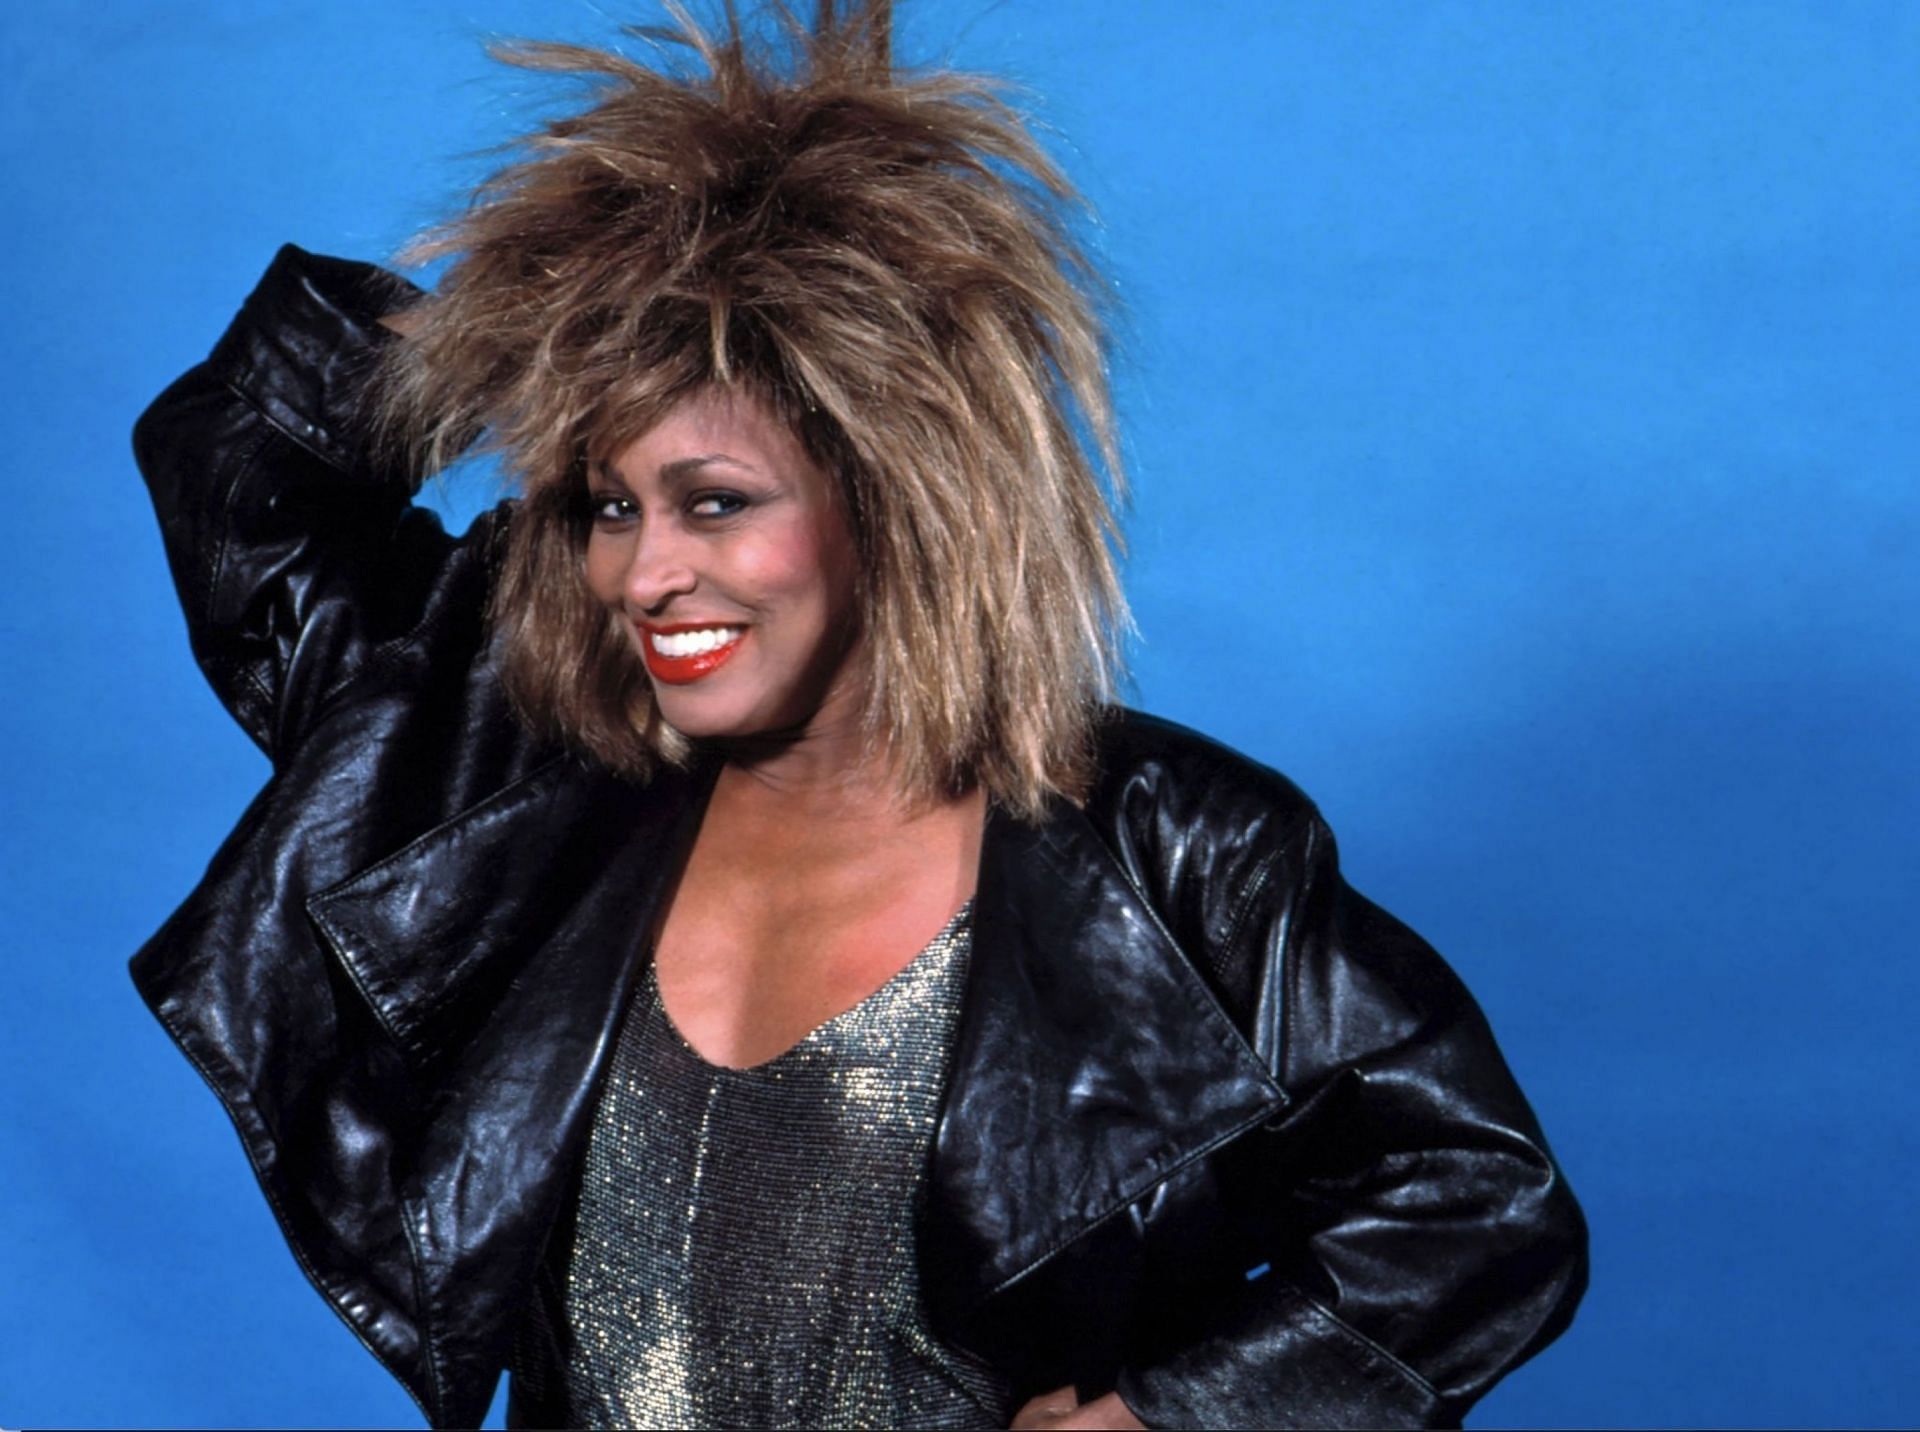 American-Swiss singer and actress, Tina Turner poses for a portrait backstage at the Joe Louis Arena during her &quot;Private Dancer Tour&quot; on August 18, 1985, in Detroit, Michigan(Image via Getty Images)